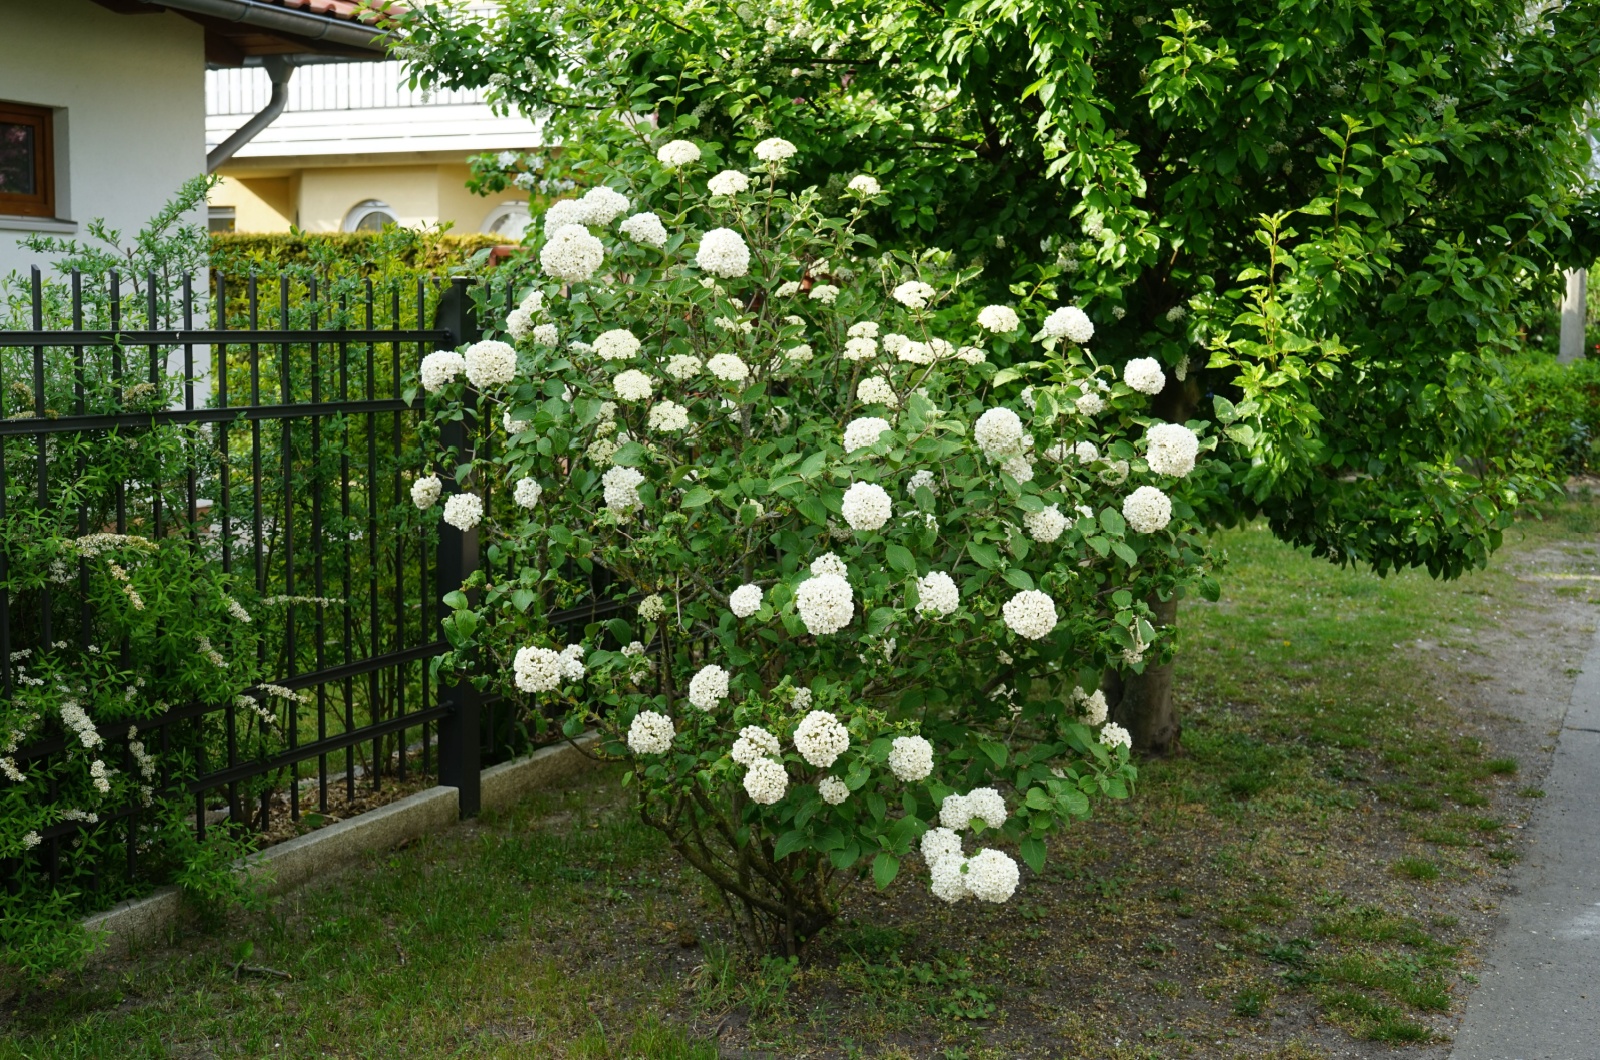 bush with white flowers in bloom